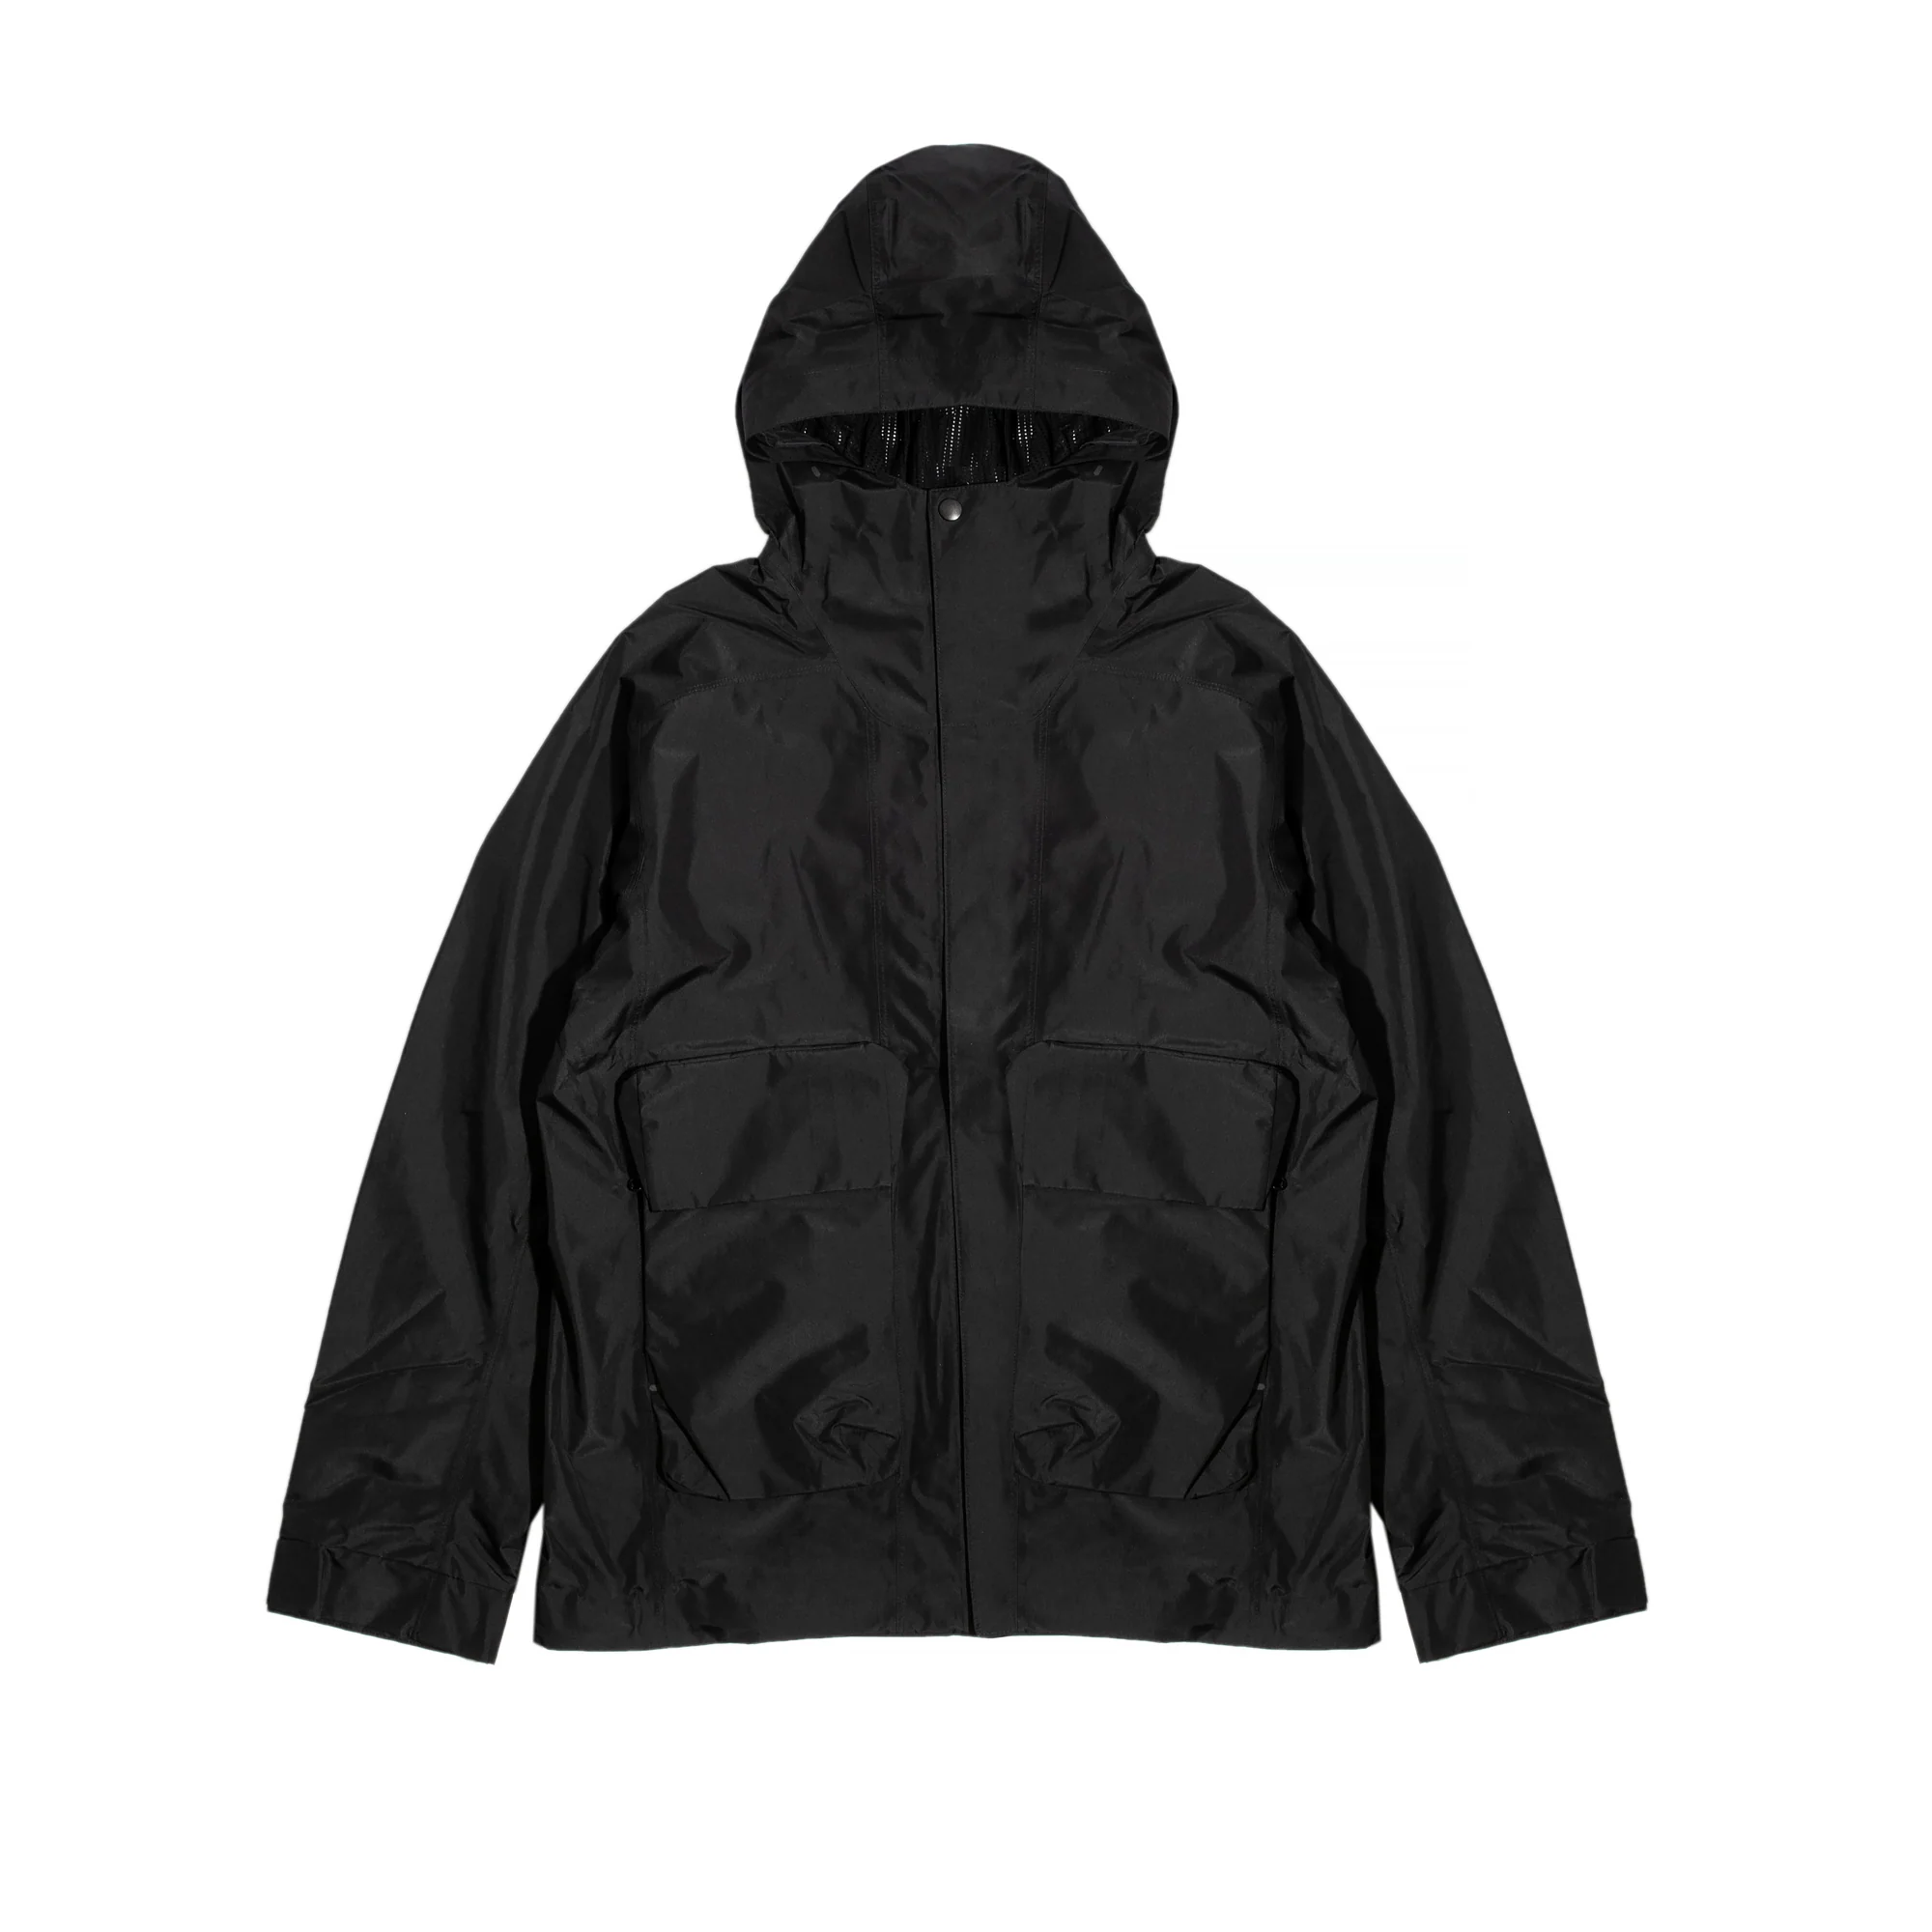 Over 50% OFF the Nike Tech Storm Fit Gore-Tex Jacket 